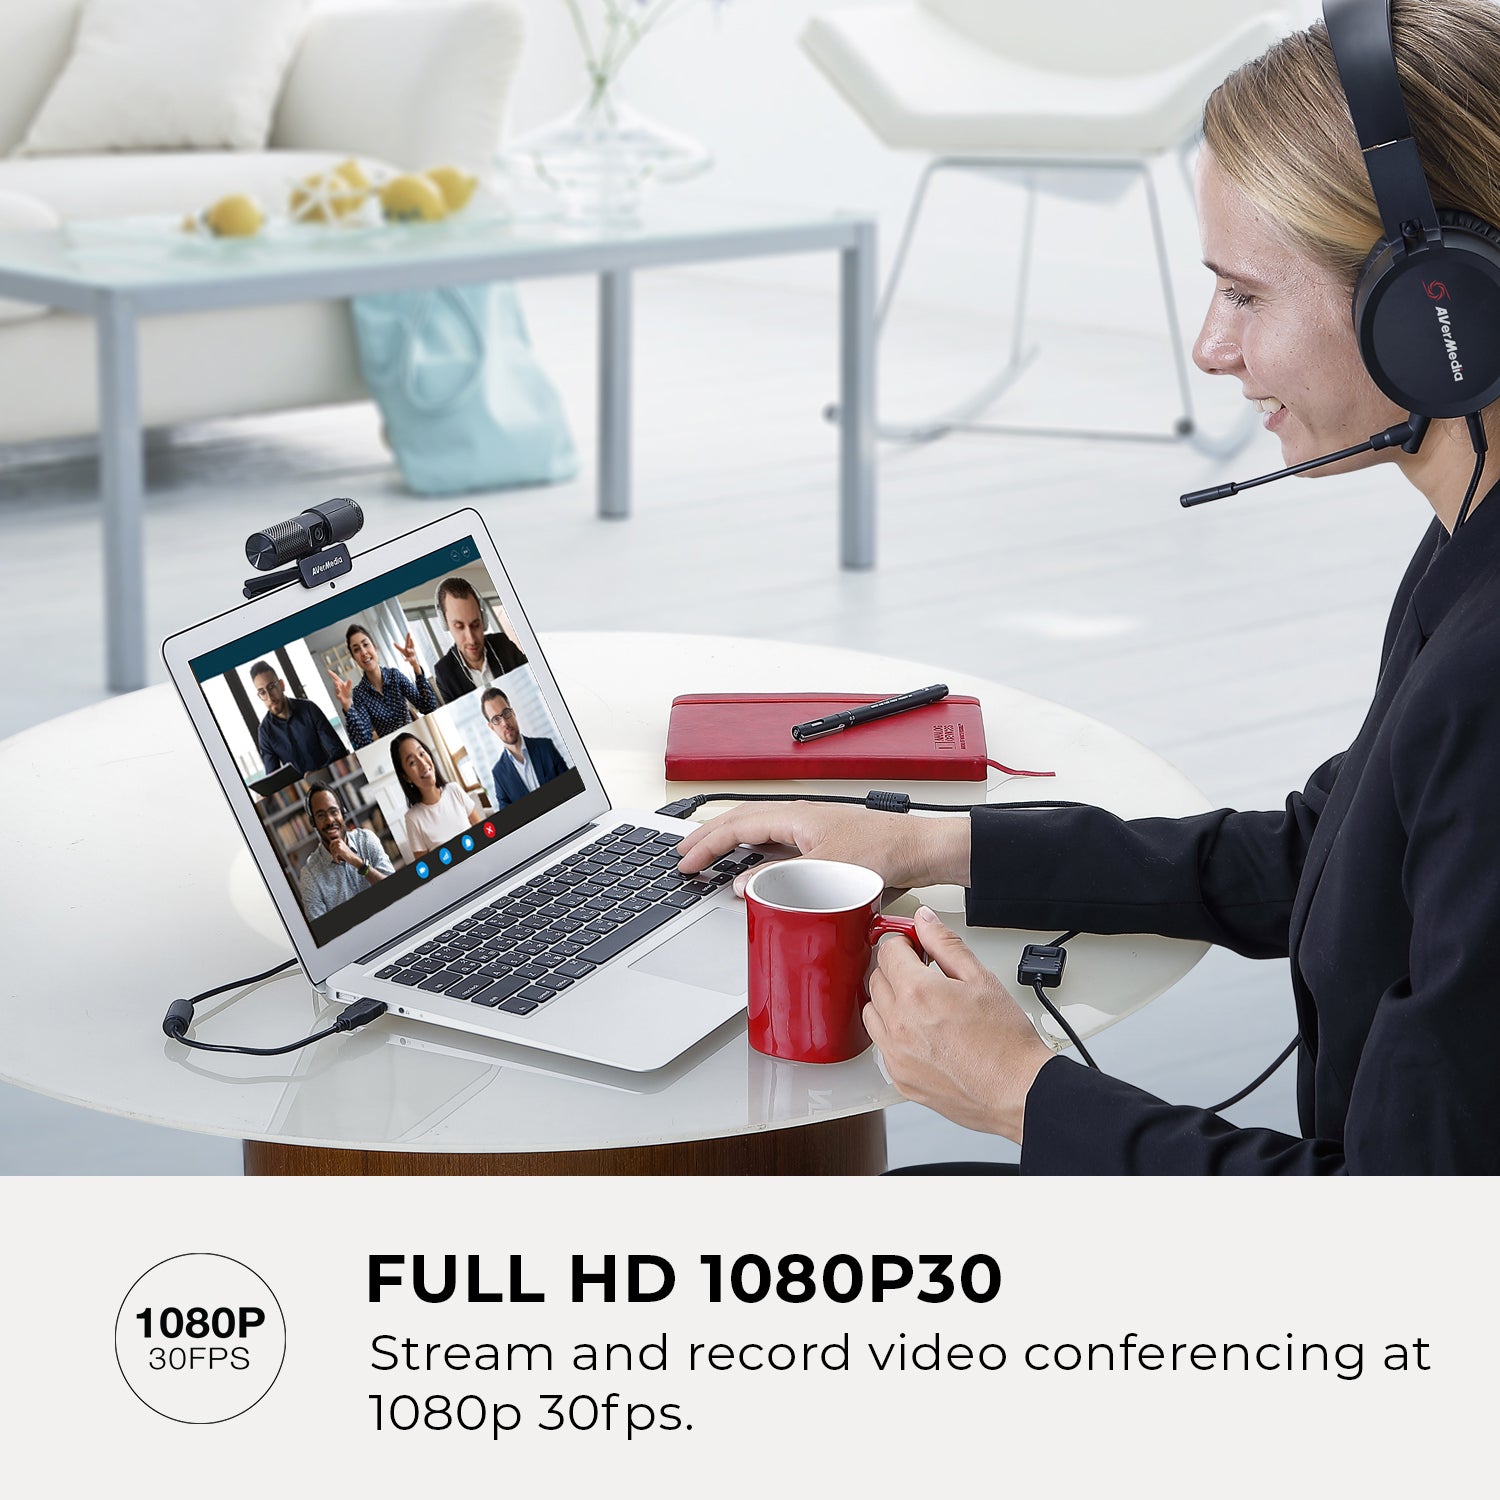 Full HD 1080p30: Stream and record video conferencing at 1080p 30 fps.